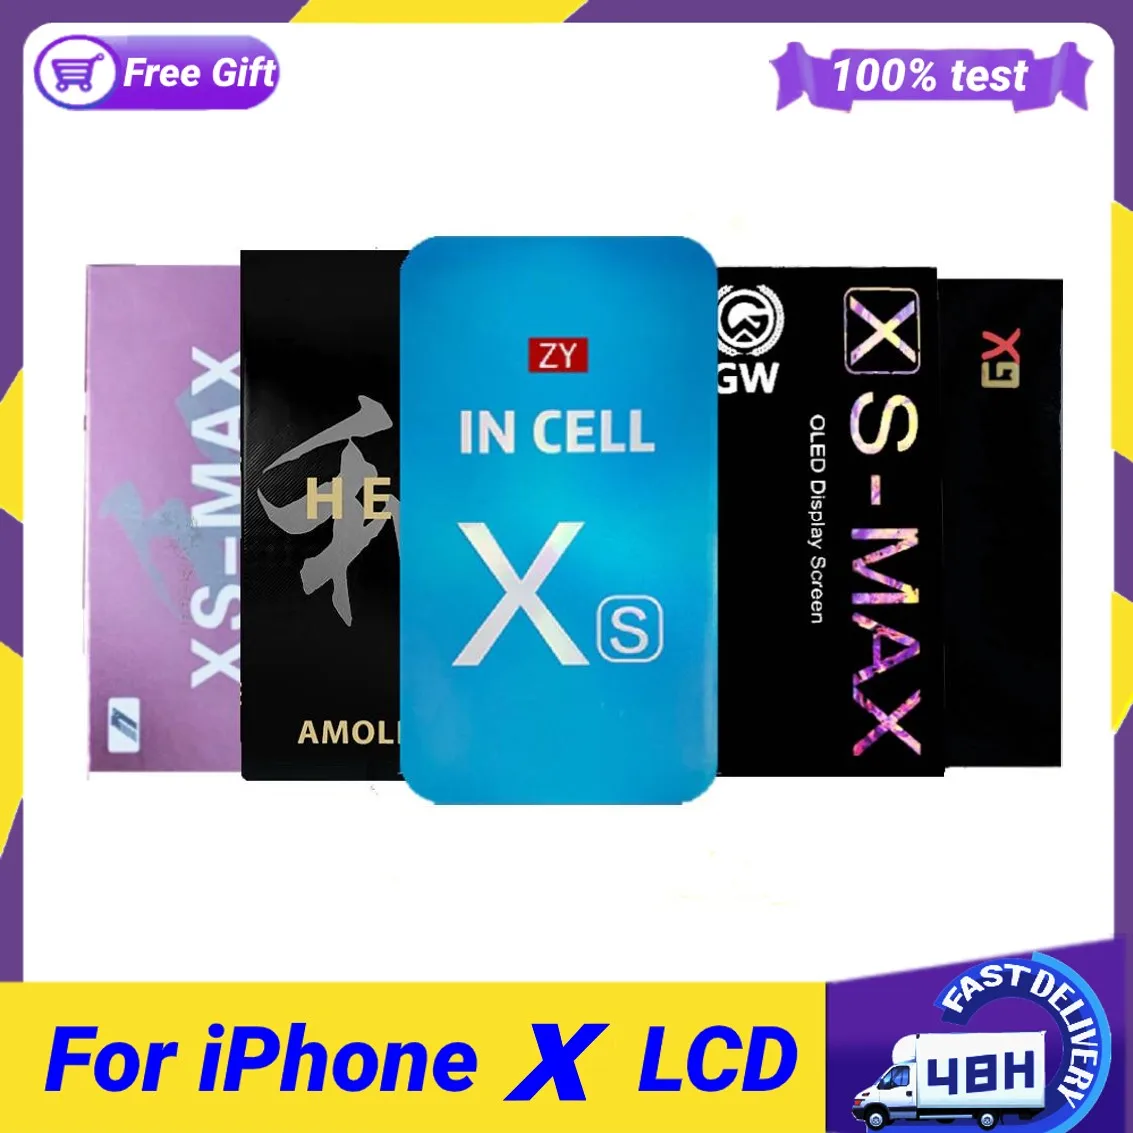 

OLED Screen GX JK GW ZY HE Incell For iPhone X XS Max XR 11 Screen Display Digital LCD Touch Screen For iPhone 11 Pro Max screen